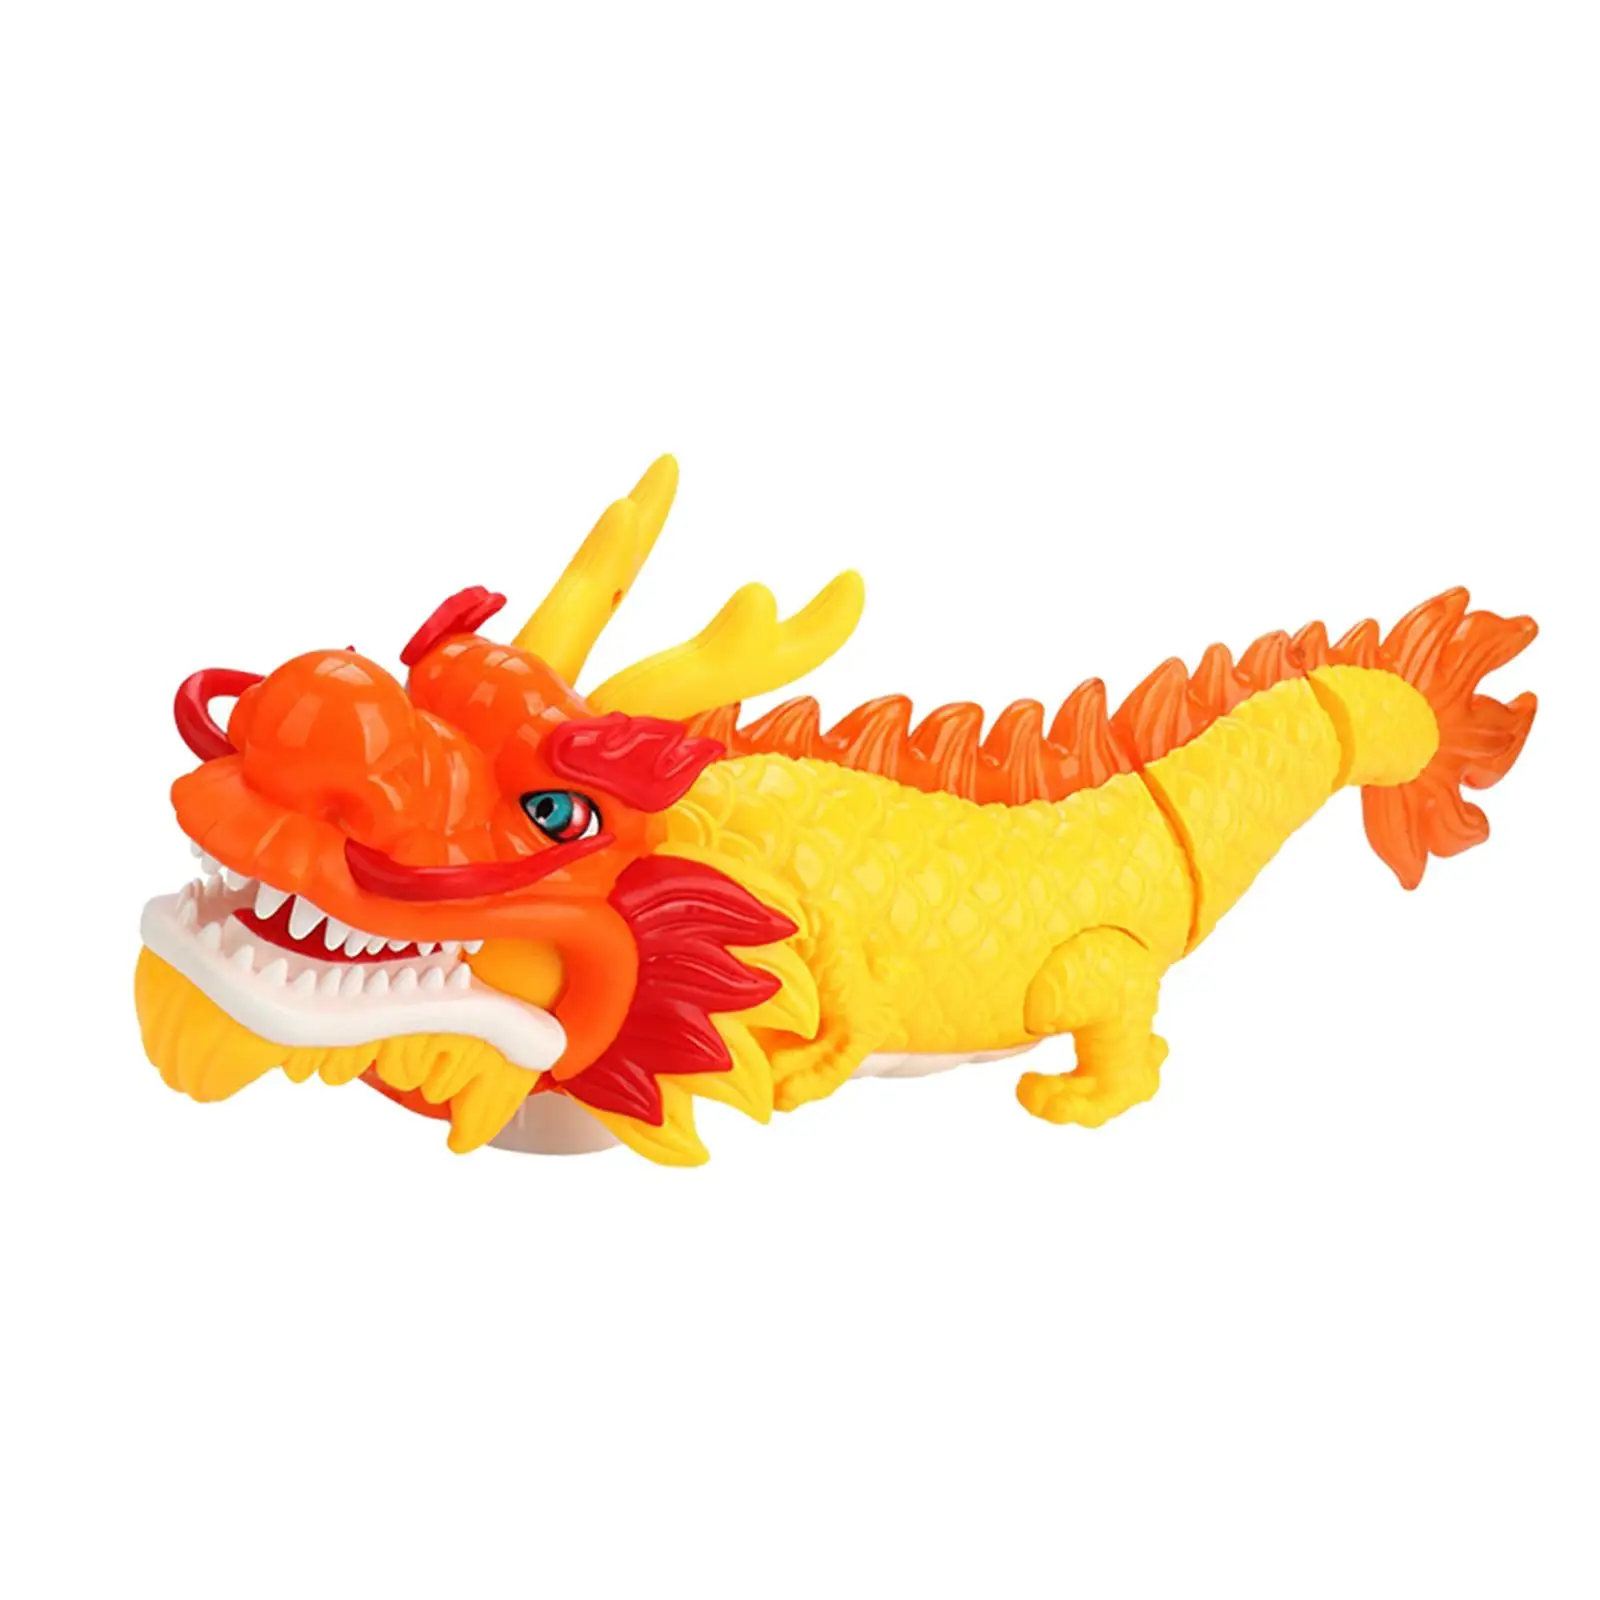 Eletric Dragon Toy Dragon Toy Gifts Birthday Gifts Realistic Crawling Toy for Children Boys 4 5 6 7 8 9 Year Olds Kid Adults